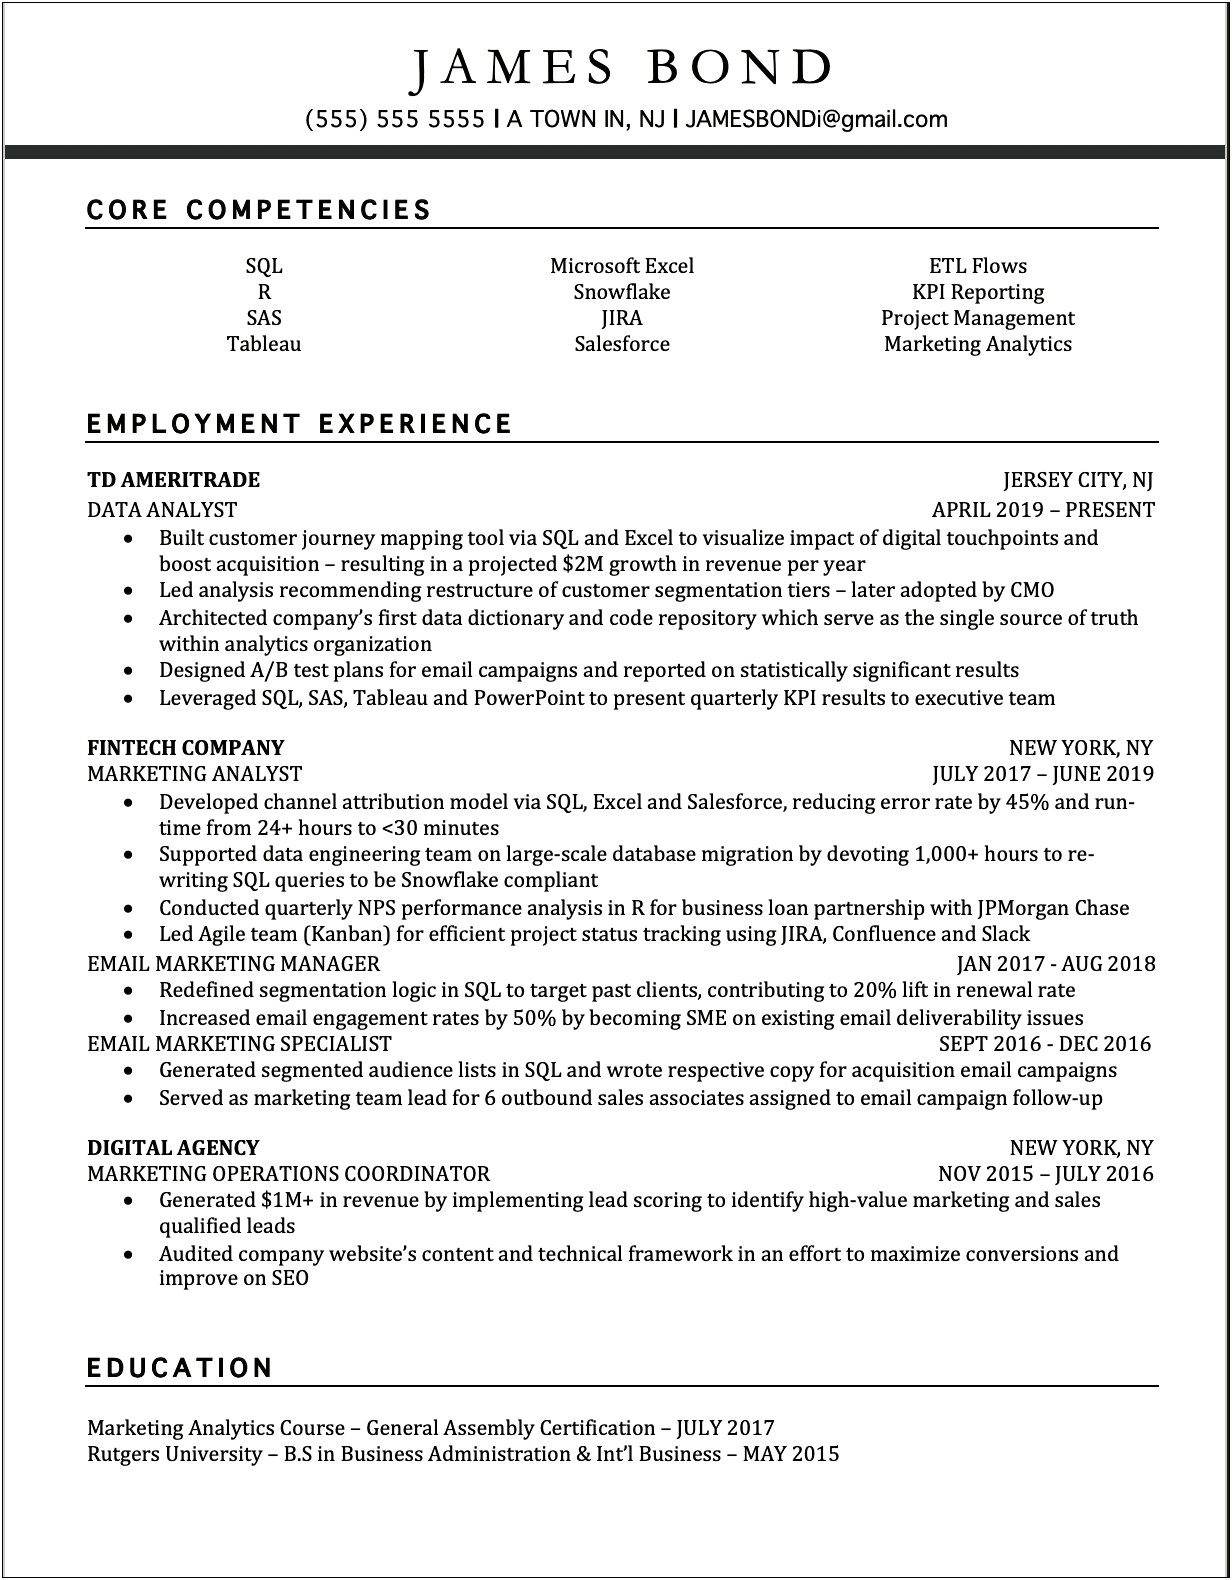 Resume Samples Same Company Different Positions